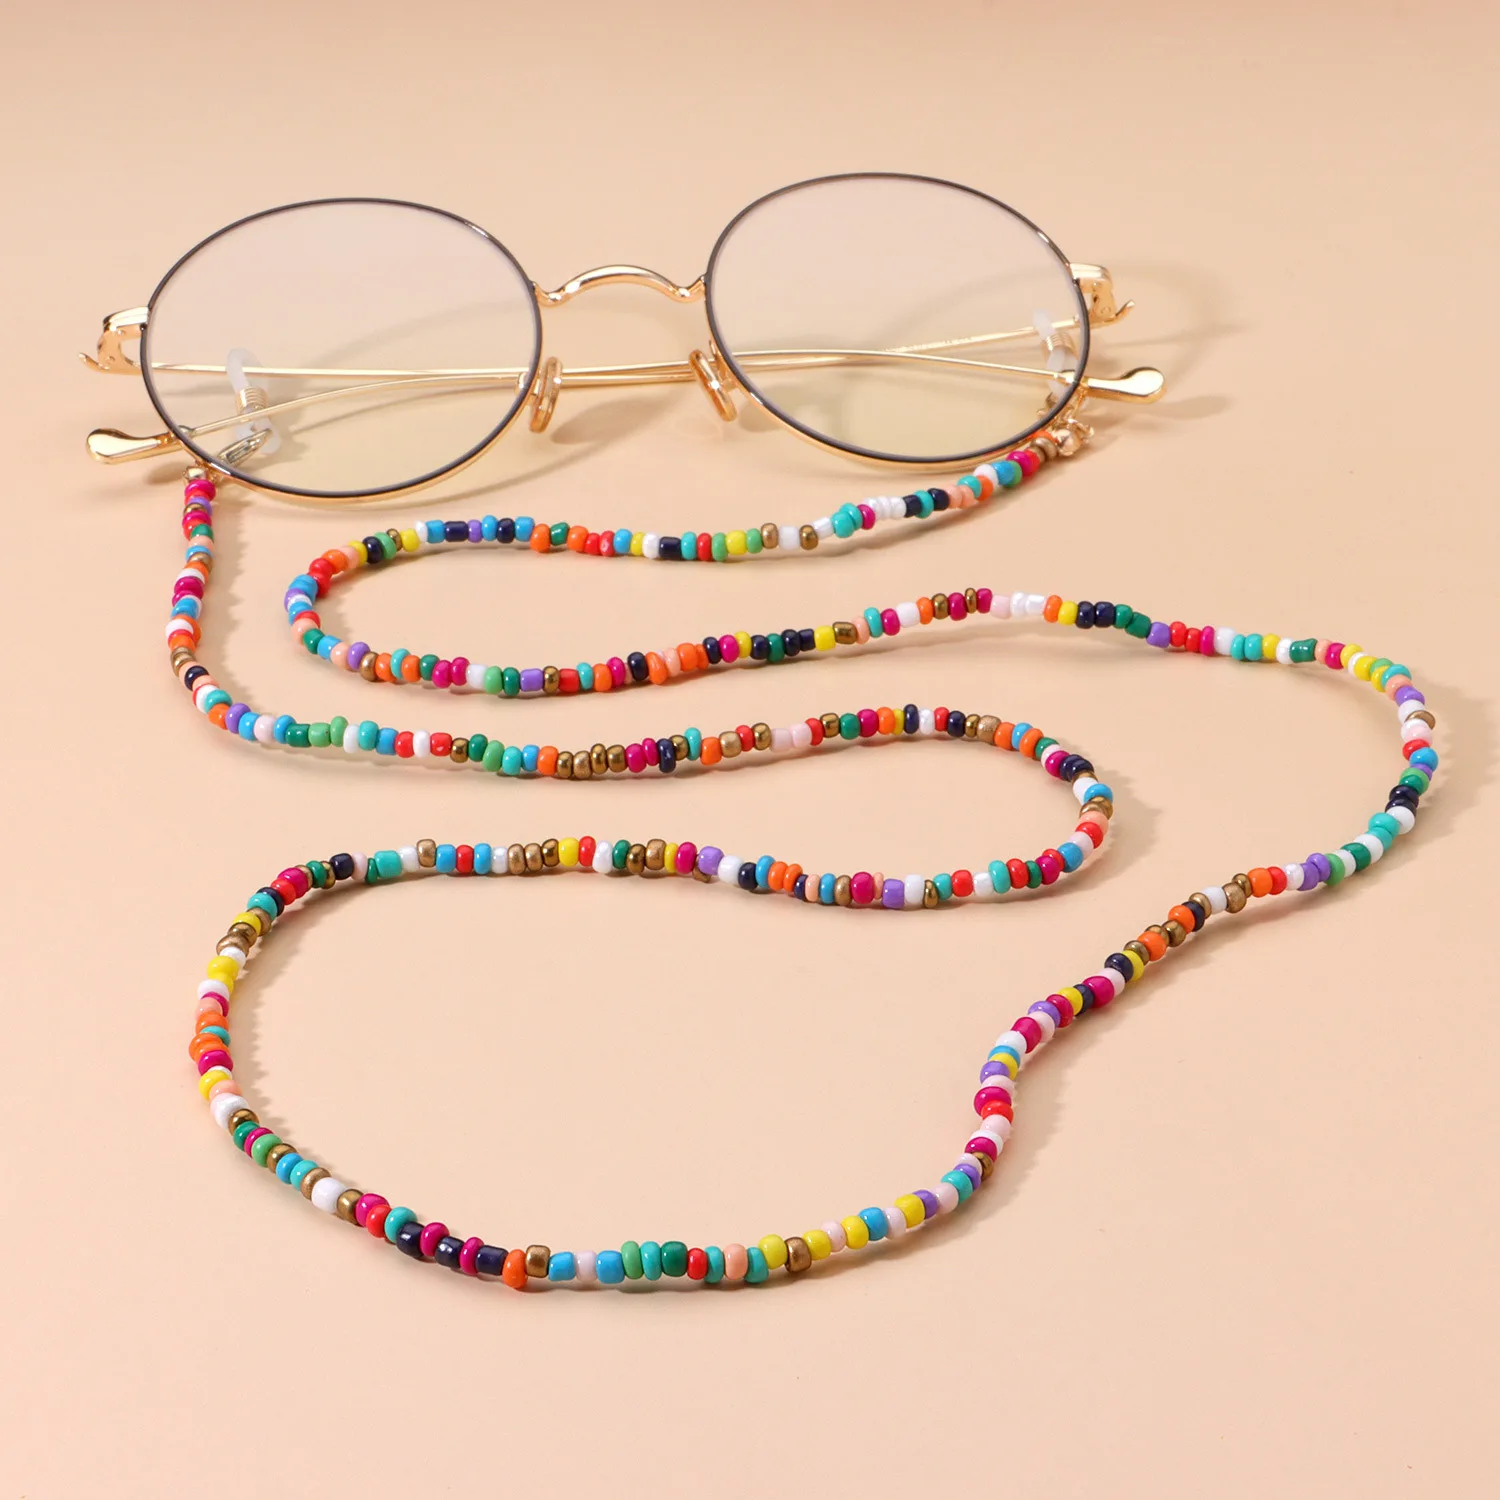 2021 Multicolor Beads Face Mask Chain Holder Women Sunglasses Eyeglasses Lanyards Hanging Neck Strap Chain Necklace Accessories